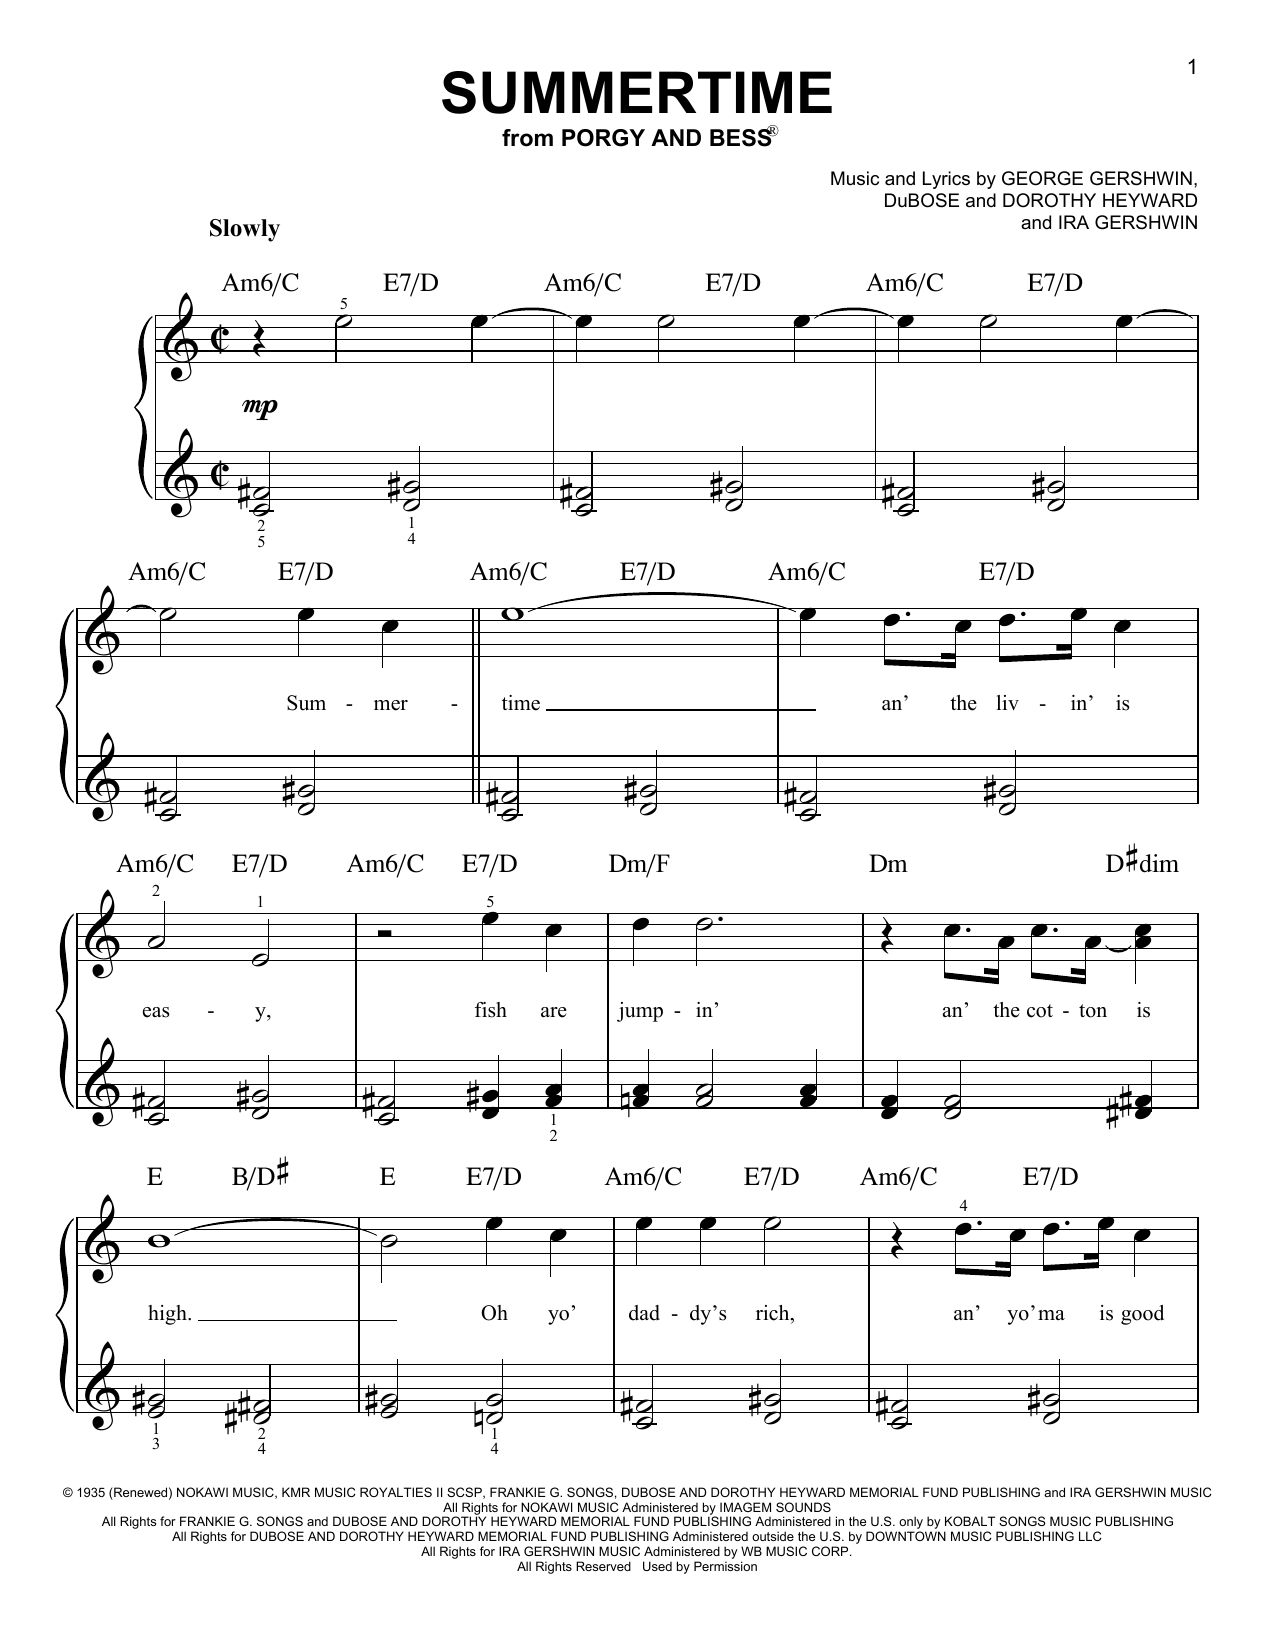 George Gershwin Summertime sheet music notes and chords. Download Printable PDF.